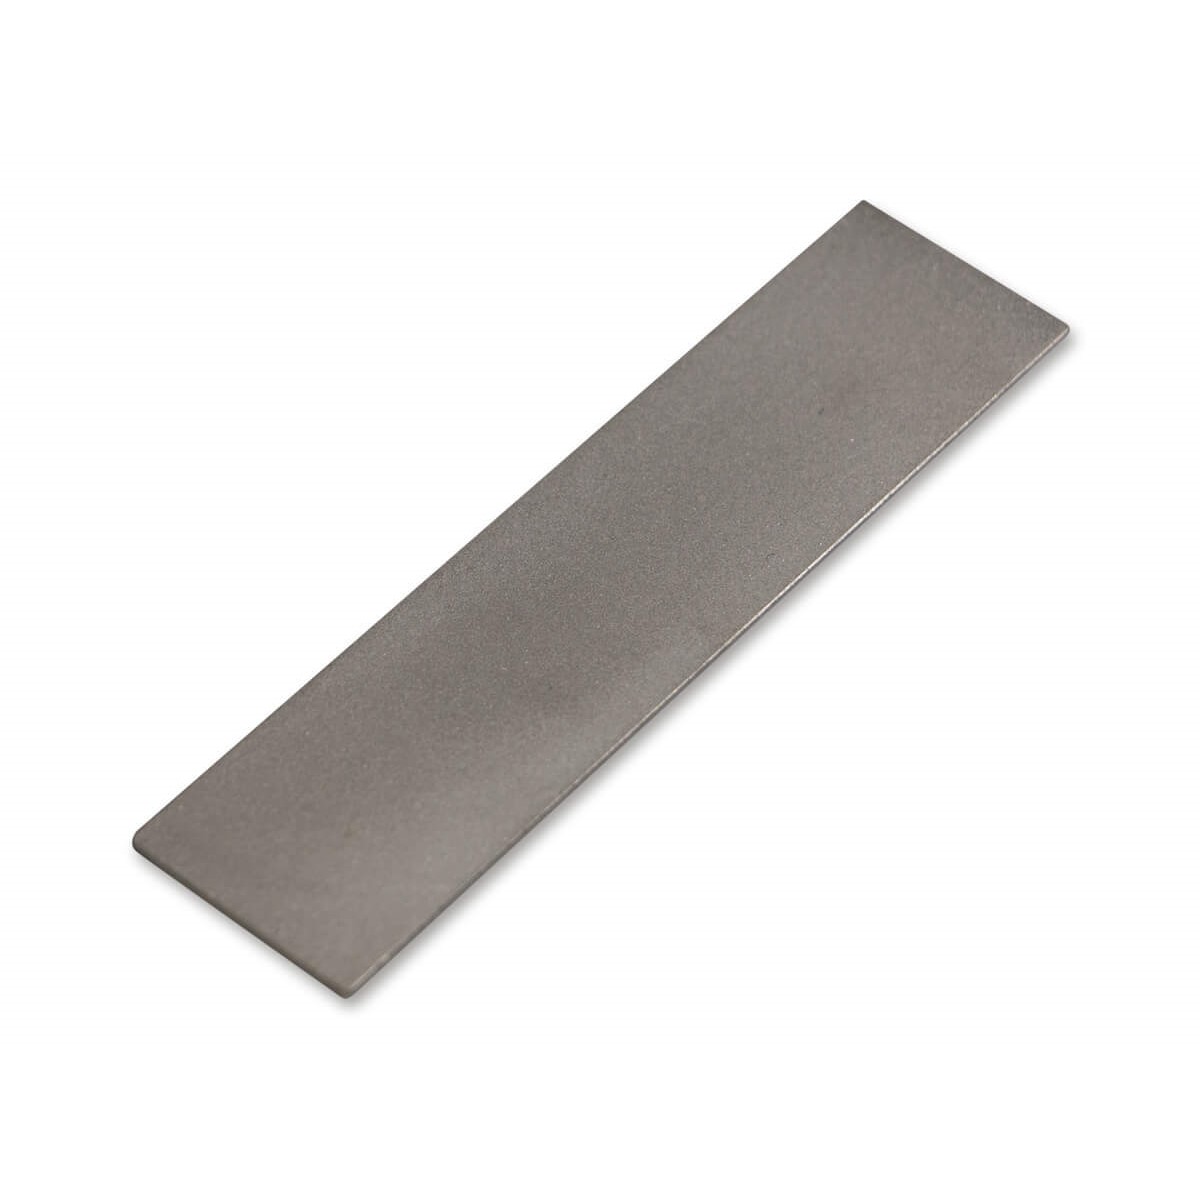 Replacement diamond grinding plate (coarse) for the Guided Field knife sharpener